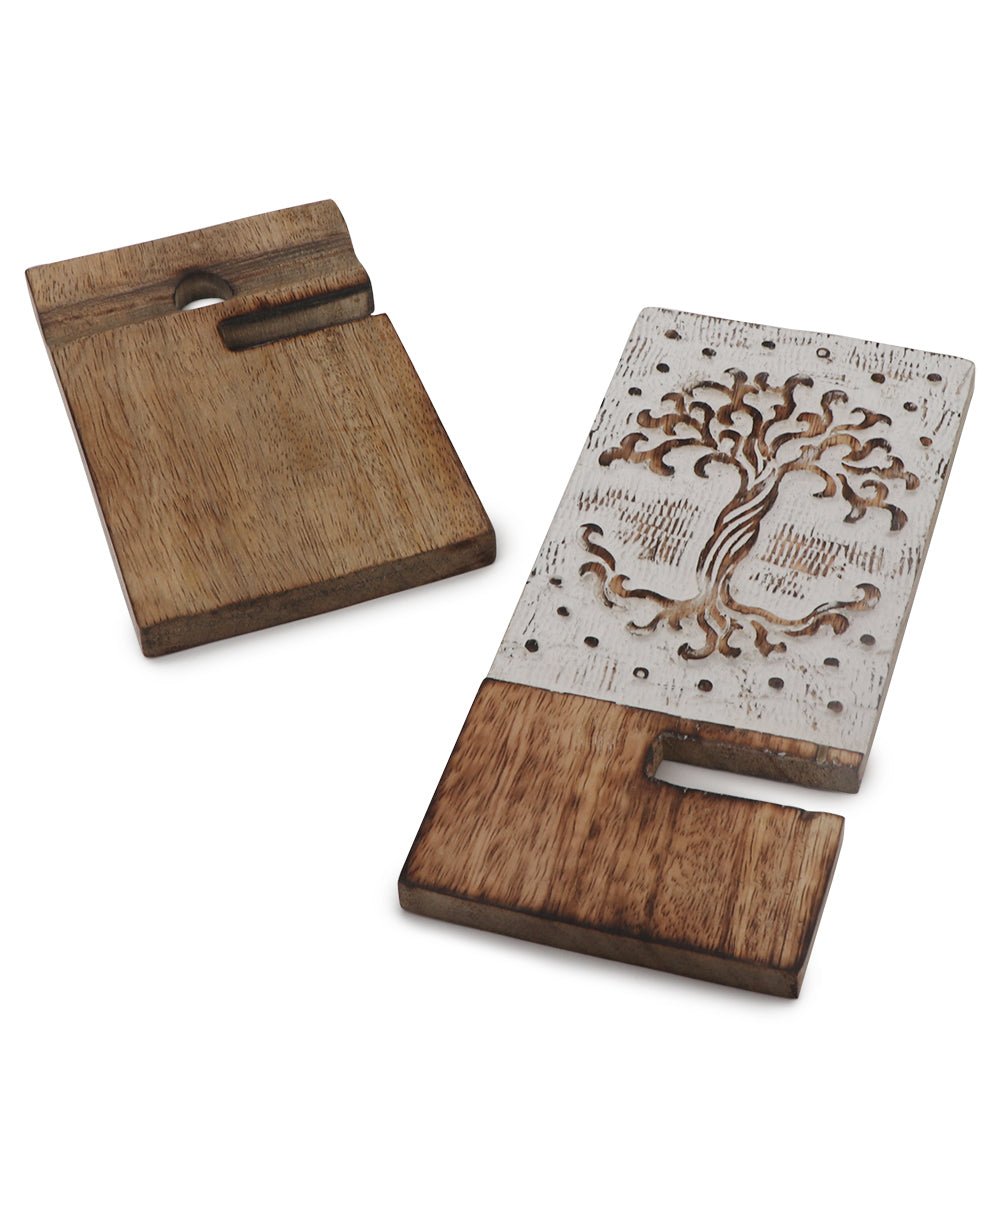 Fairtrade Tree of Life Phone Holder Charging Dock - Mobile Phone Stands